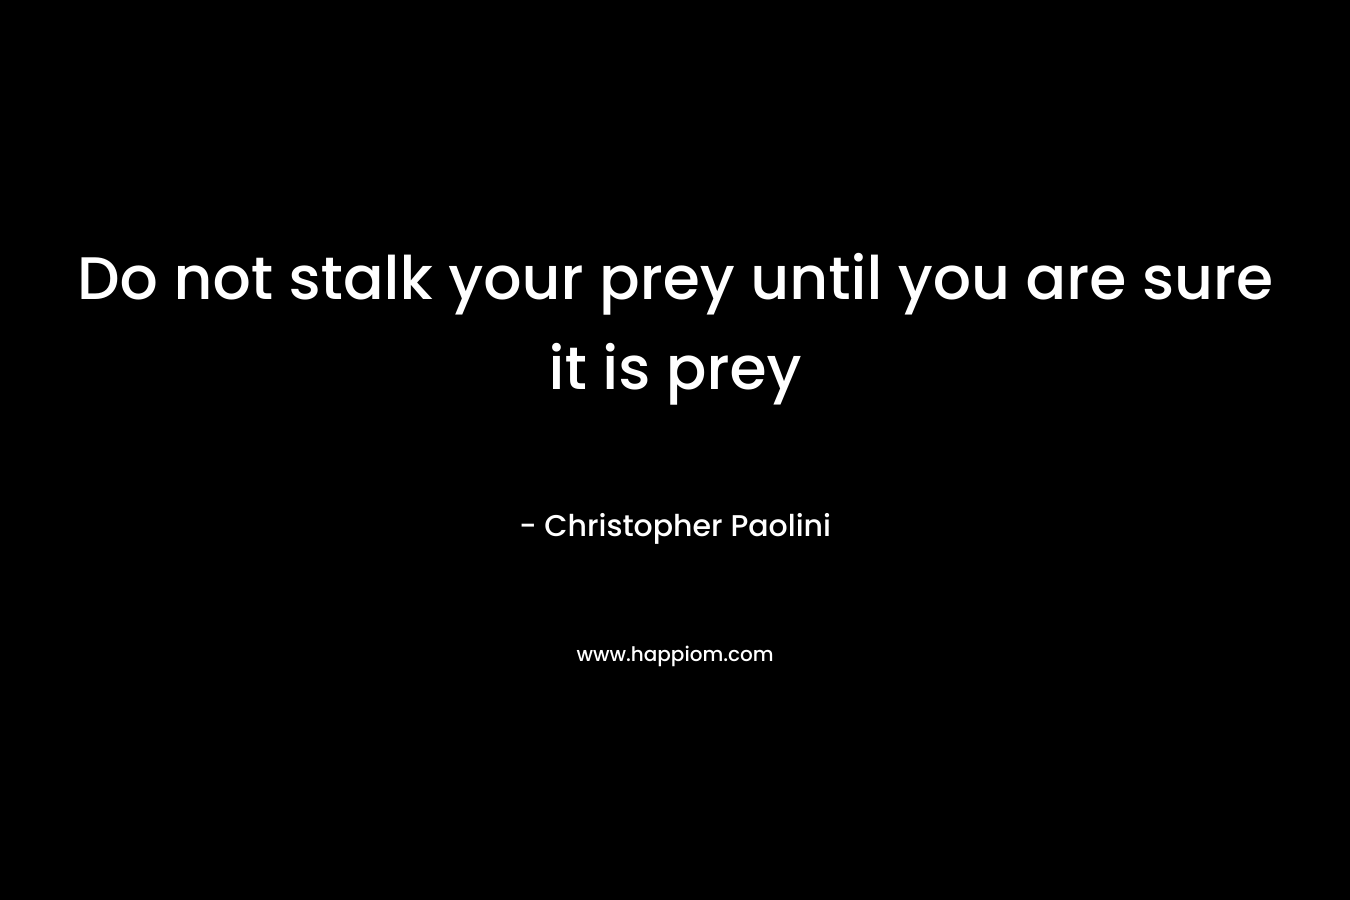 Do not stalk your prey until you are sure it is prey